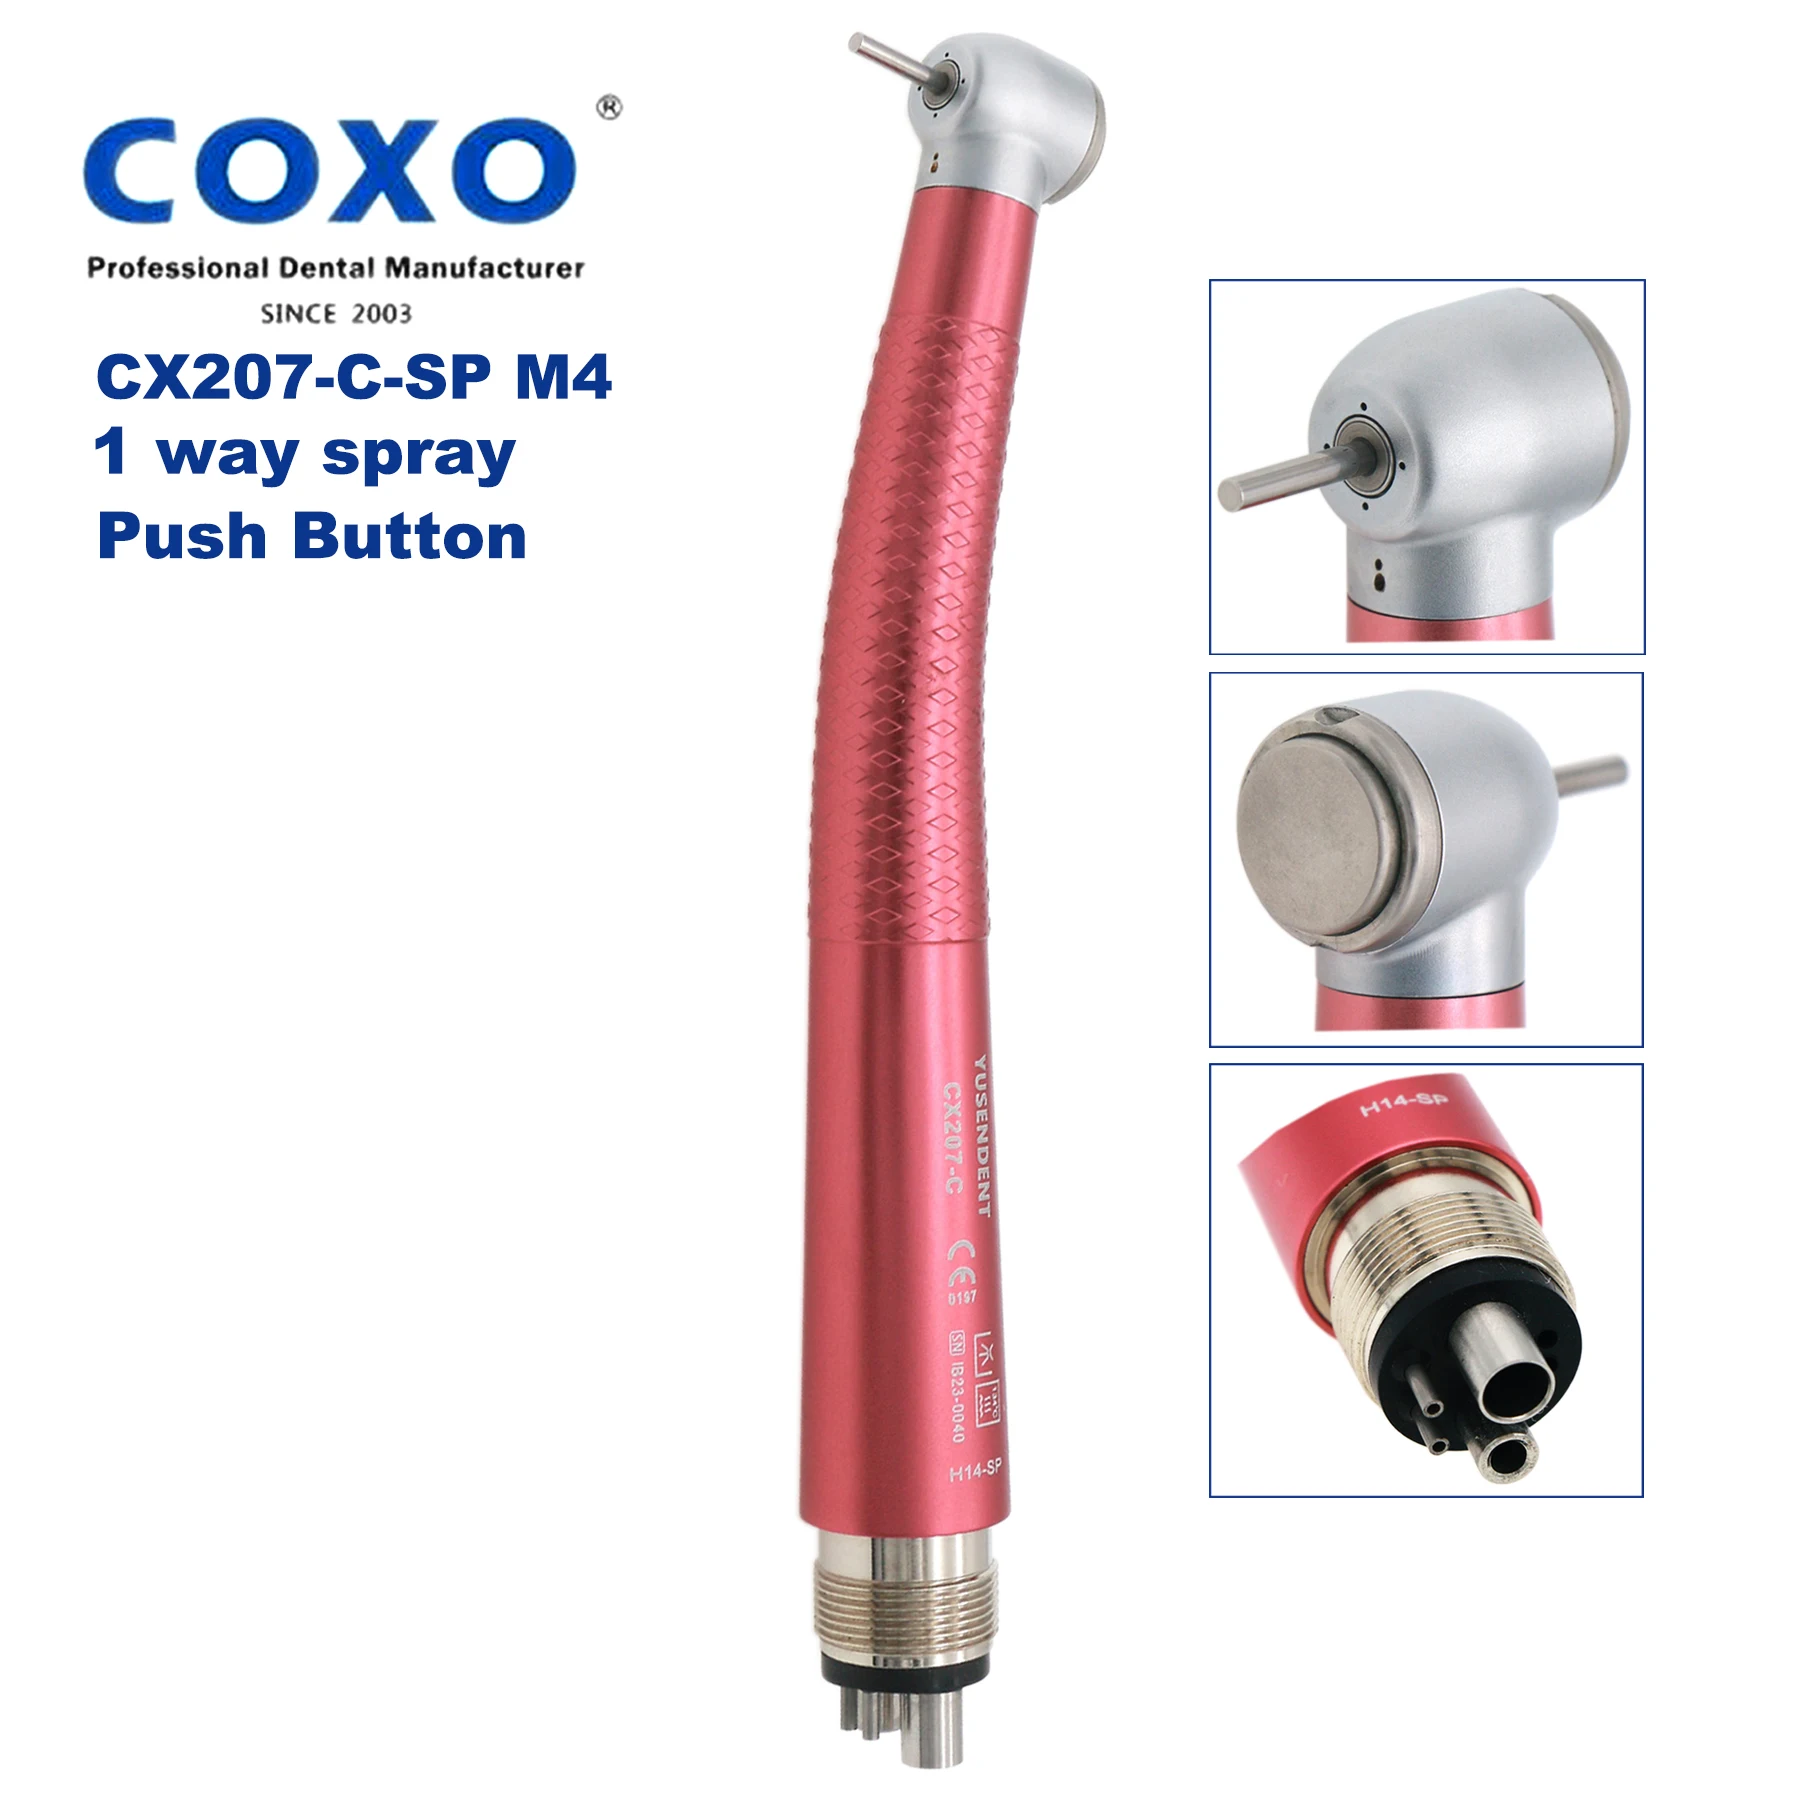 

NSK PANA MAX Type COXO YUSENDENT Dental Push Button Turbine High Speed Standard Head Red Color Handpiece M4 4Holes CX207-C-SP